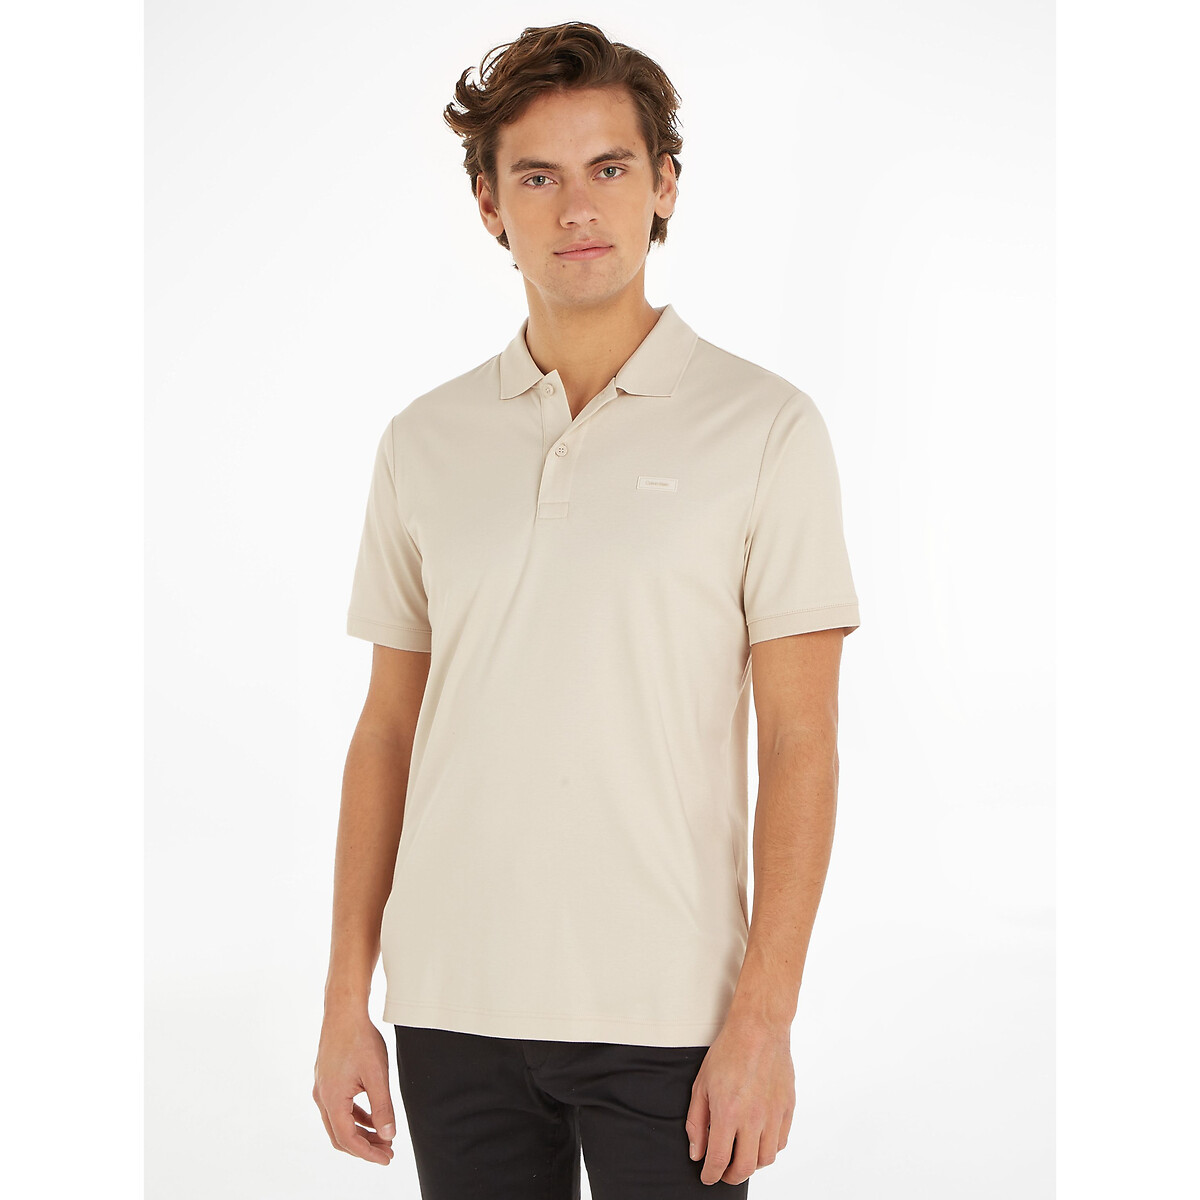 Image of Cotton Polo Shirt in Slim Fit?with Short Sleeves